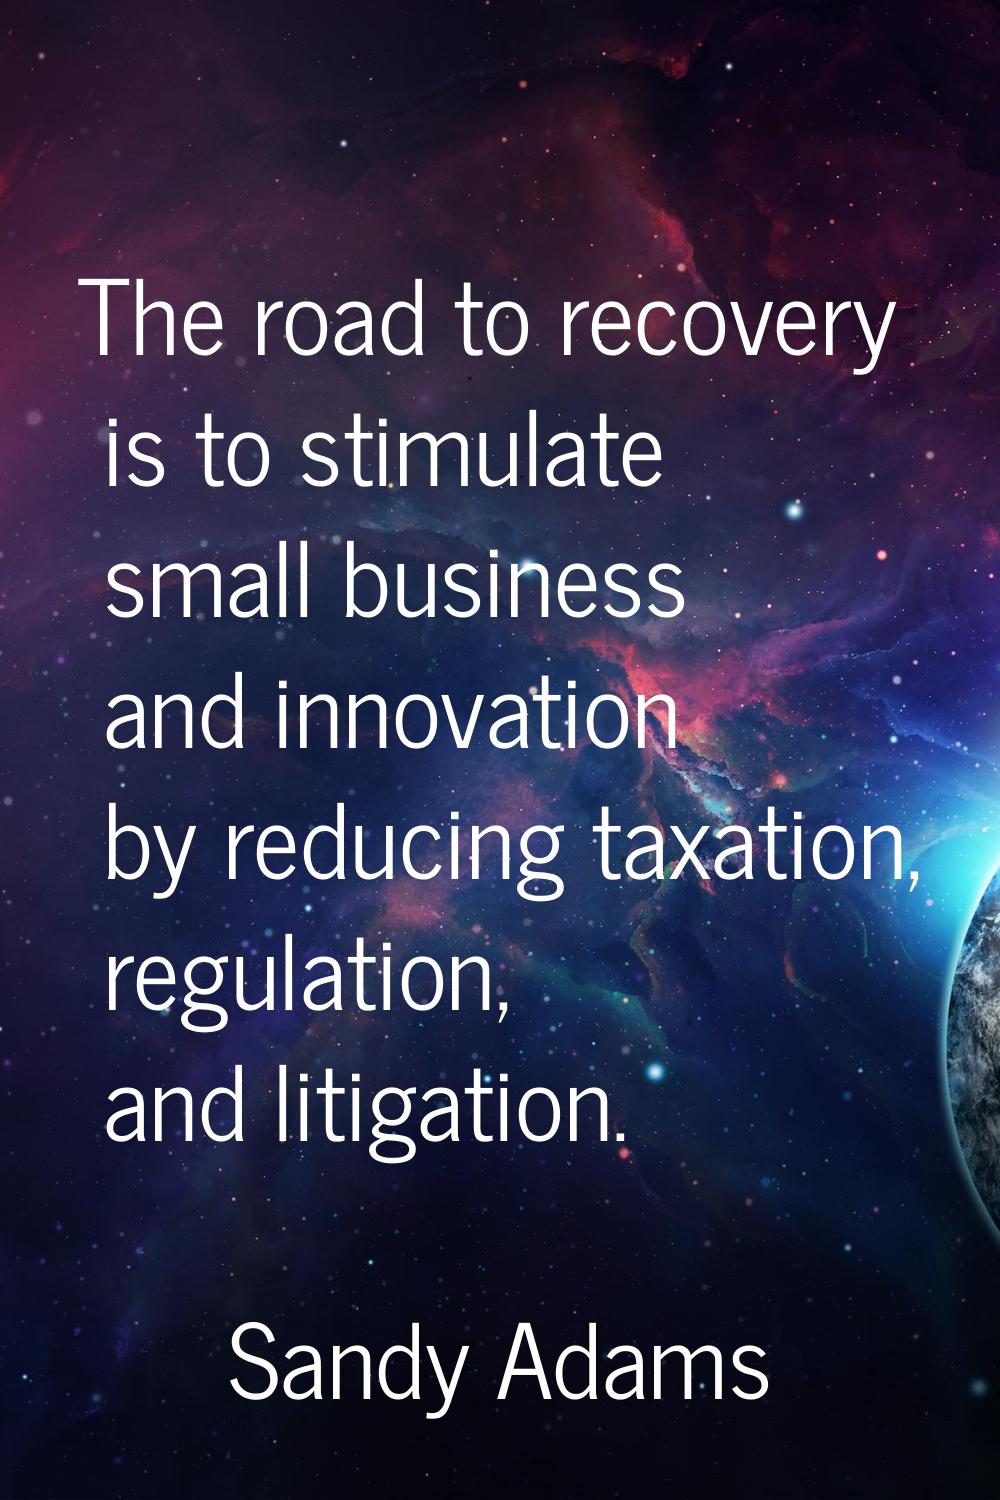 The road to recovery is to stimulate small business and innovation by reducing taxation, regulation